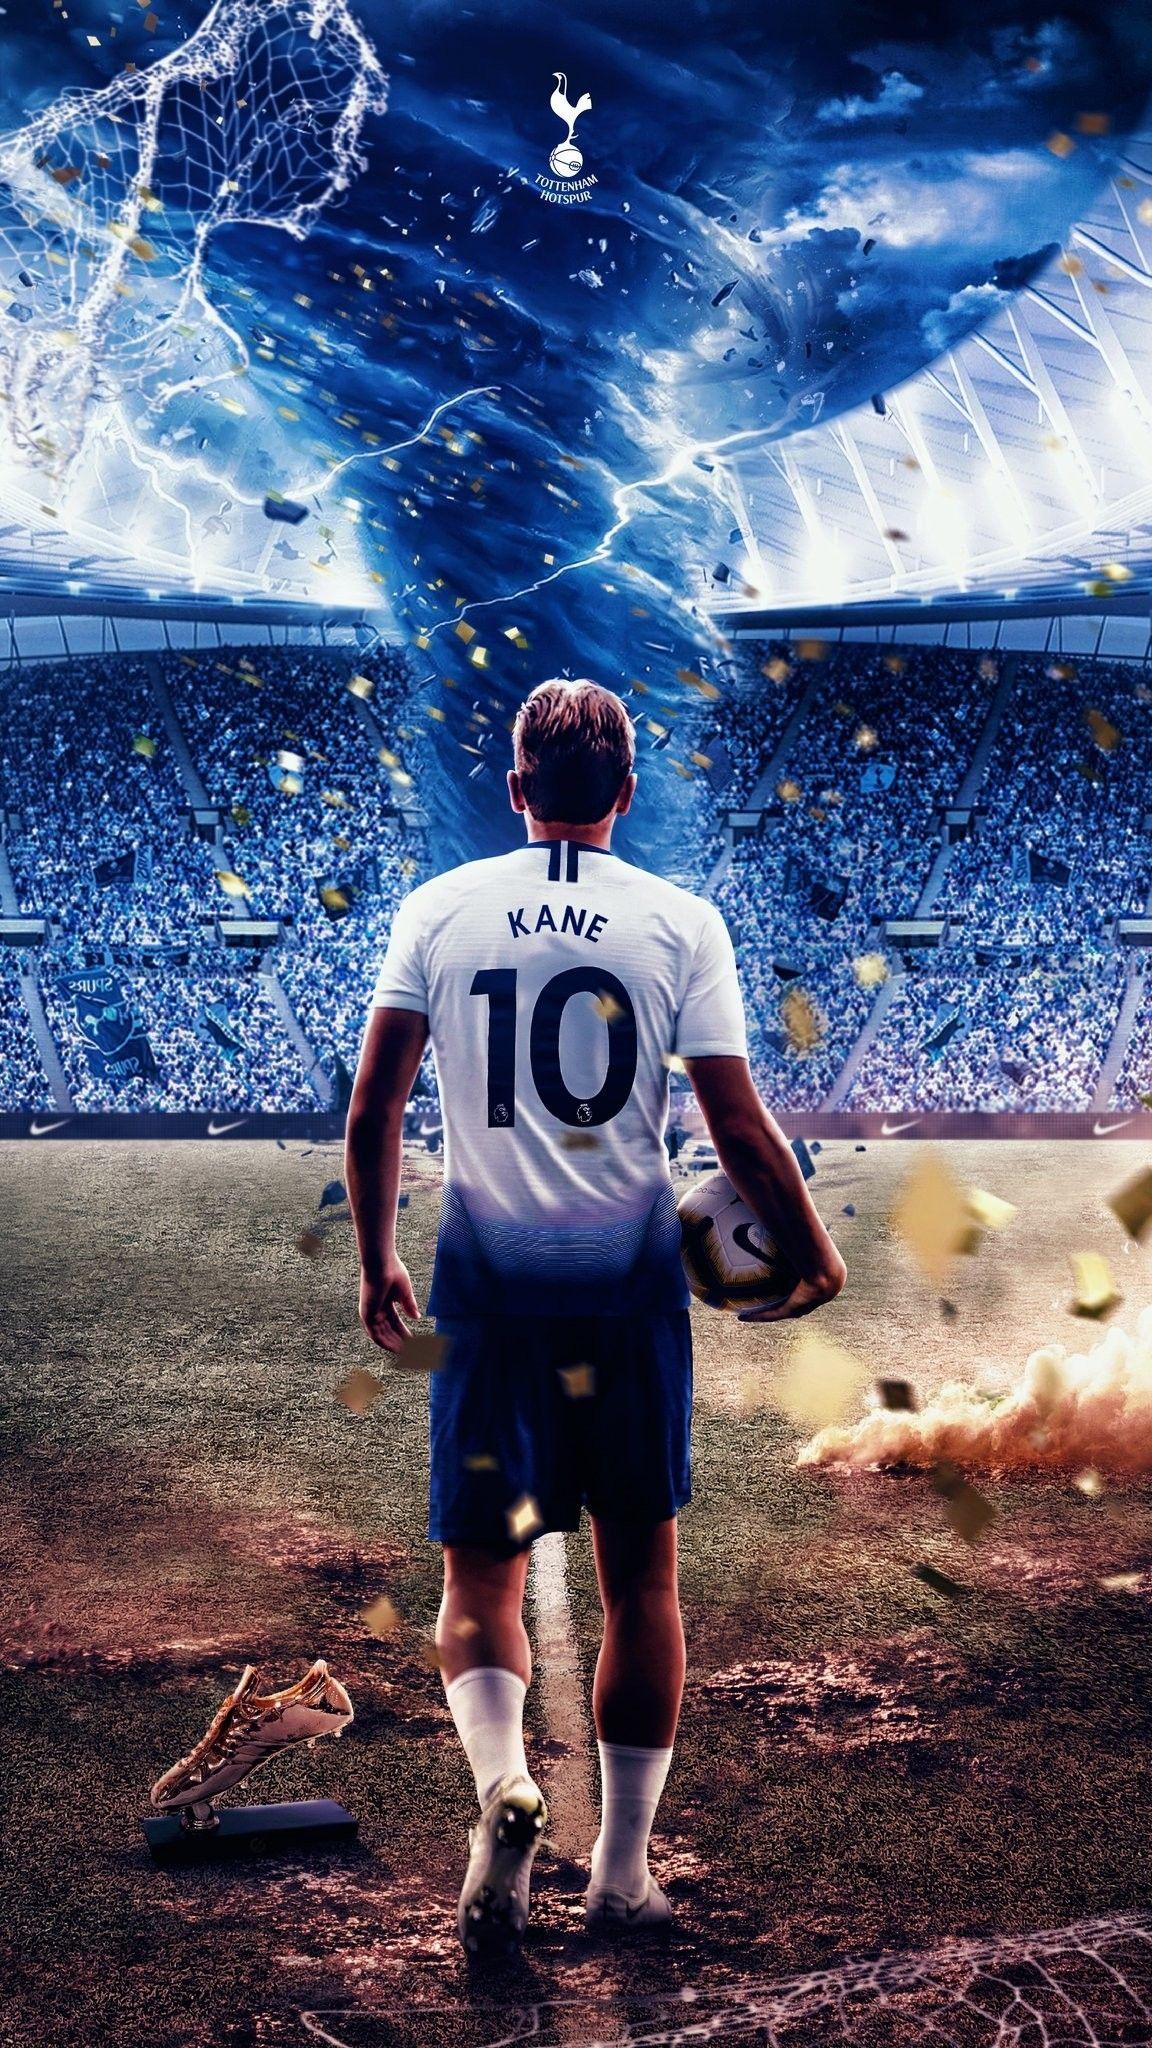 Awesome Harry Kane wallpaper I found on the internet and wanted to share